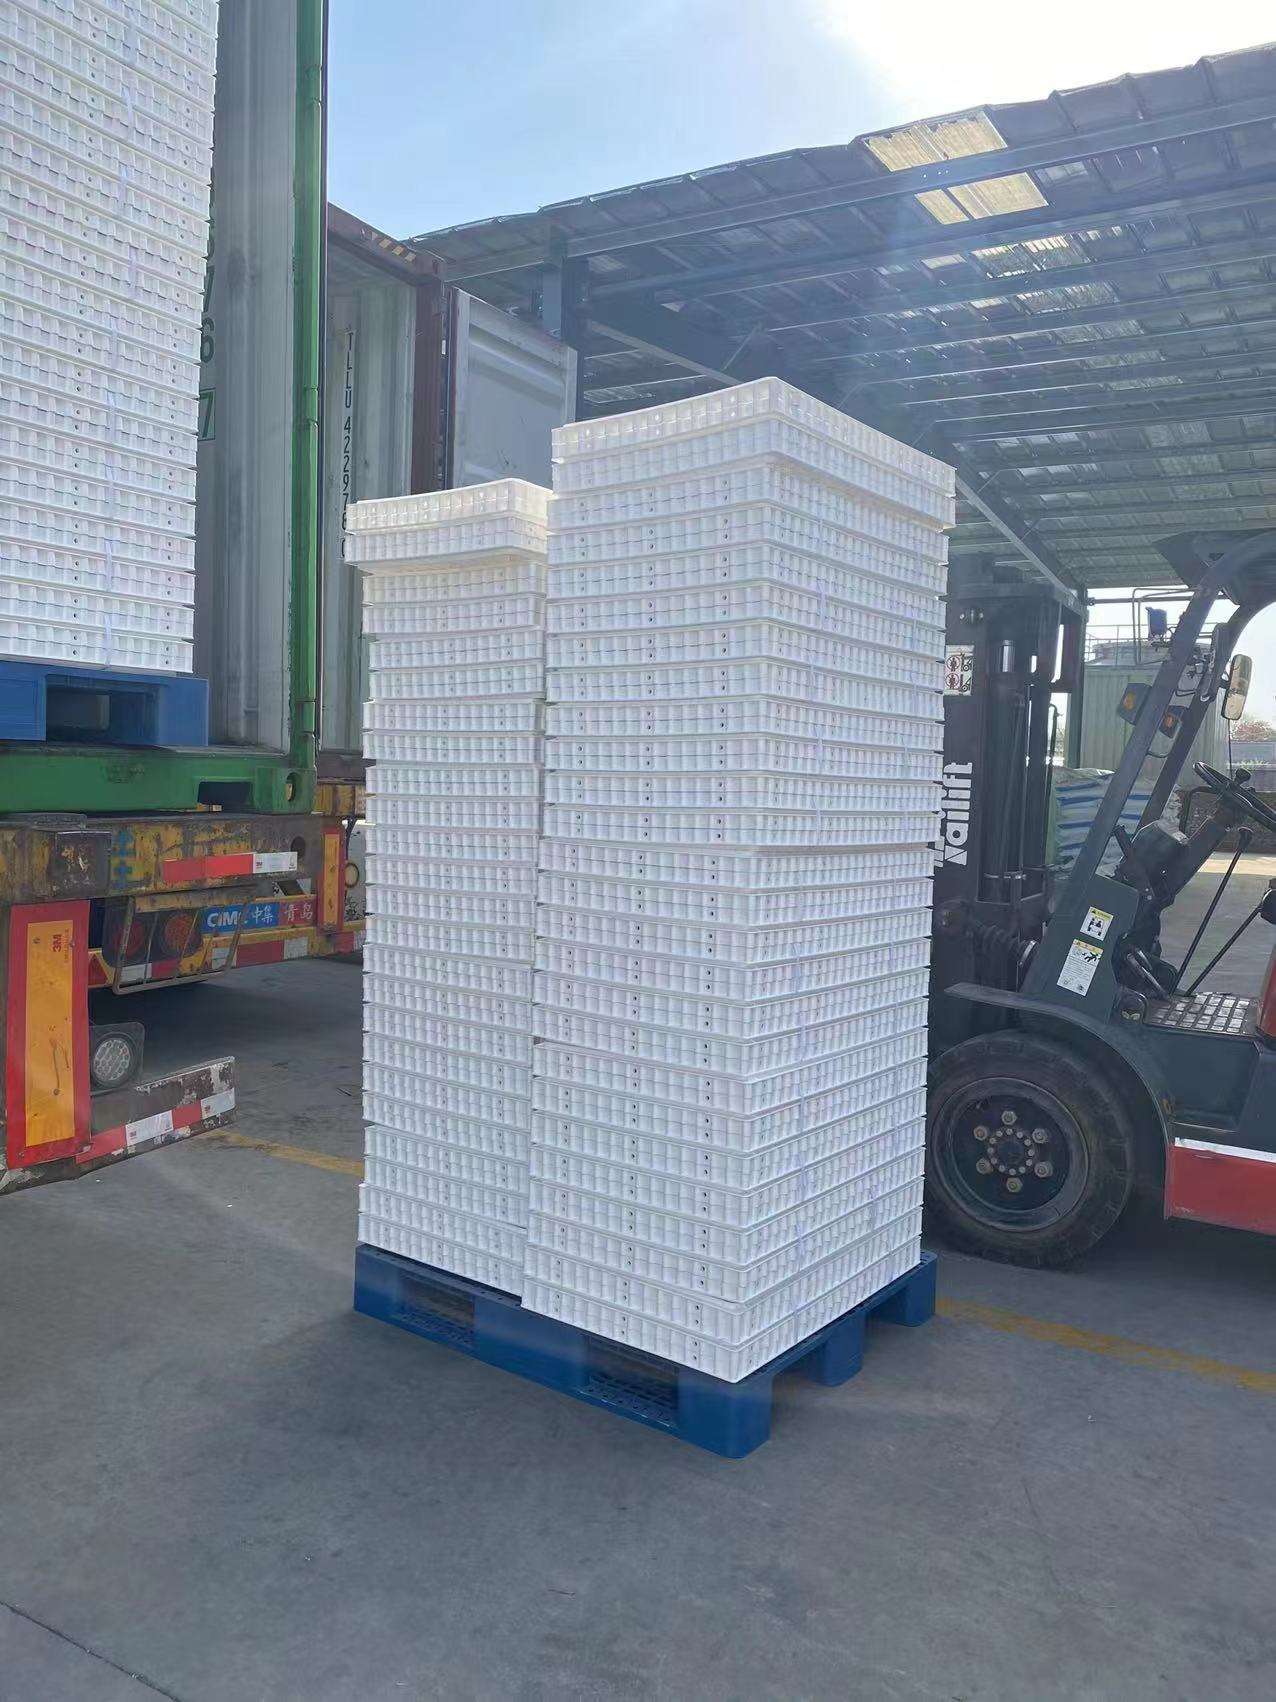 2020 poultry shipping boxes chicken crates coops